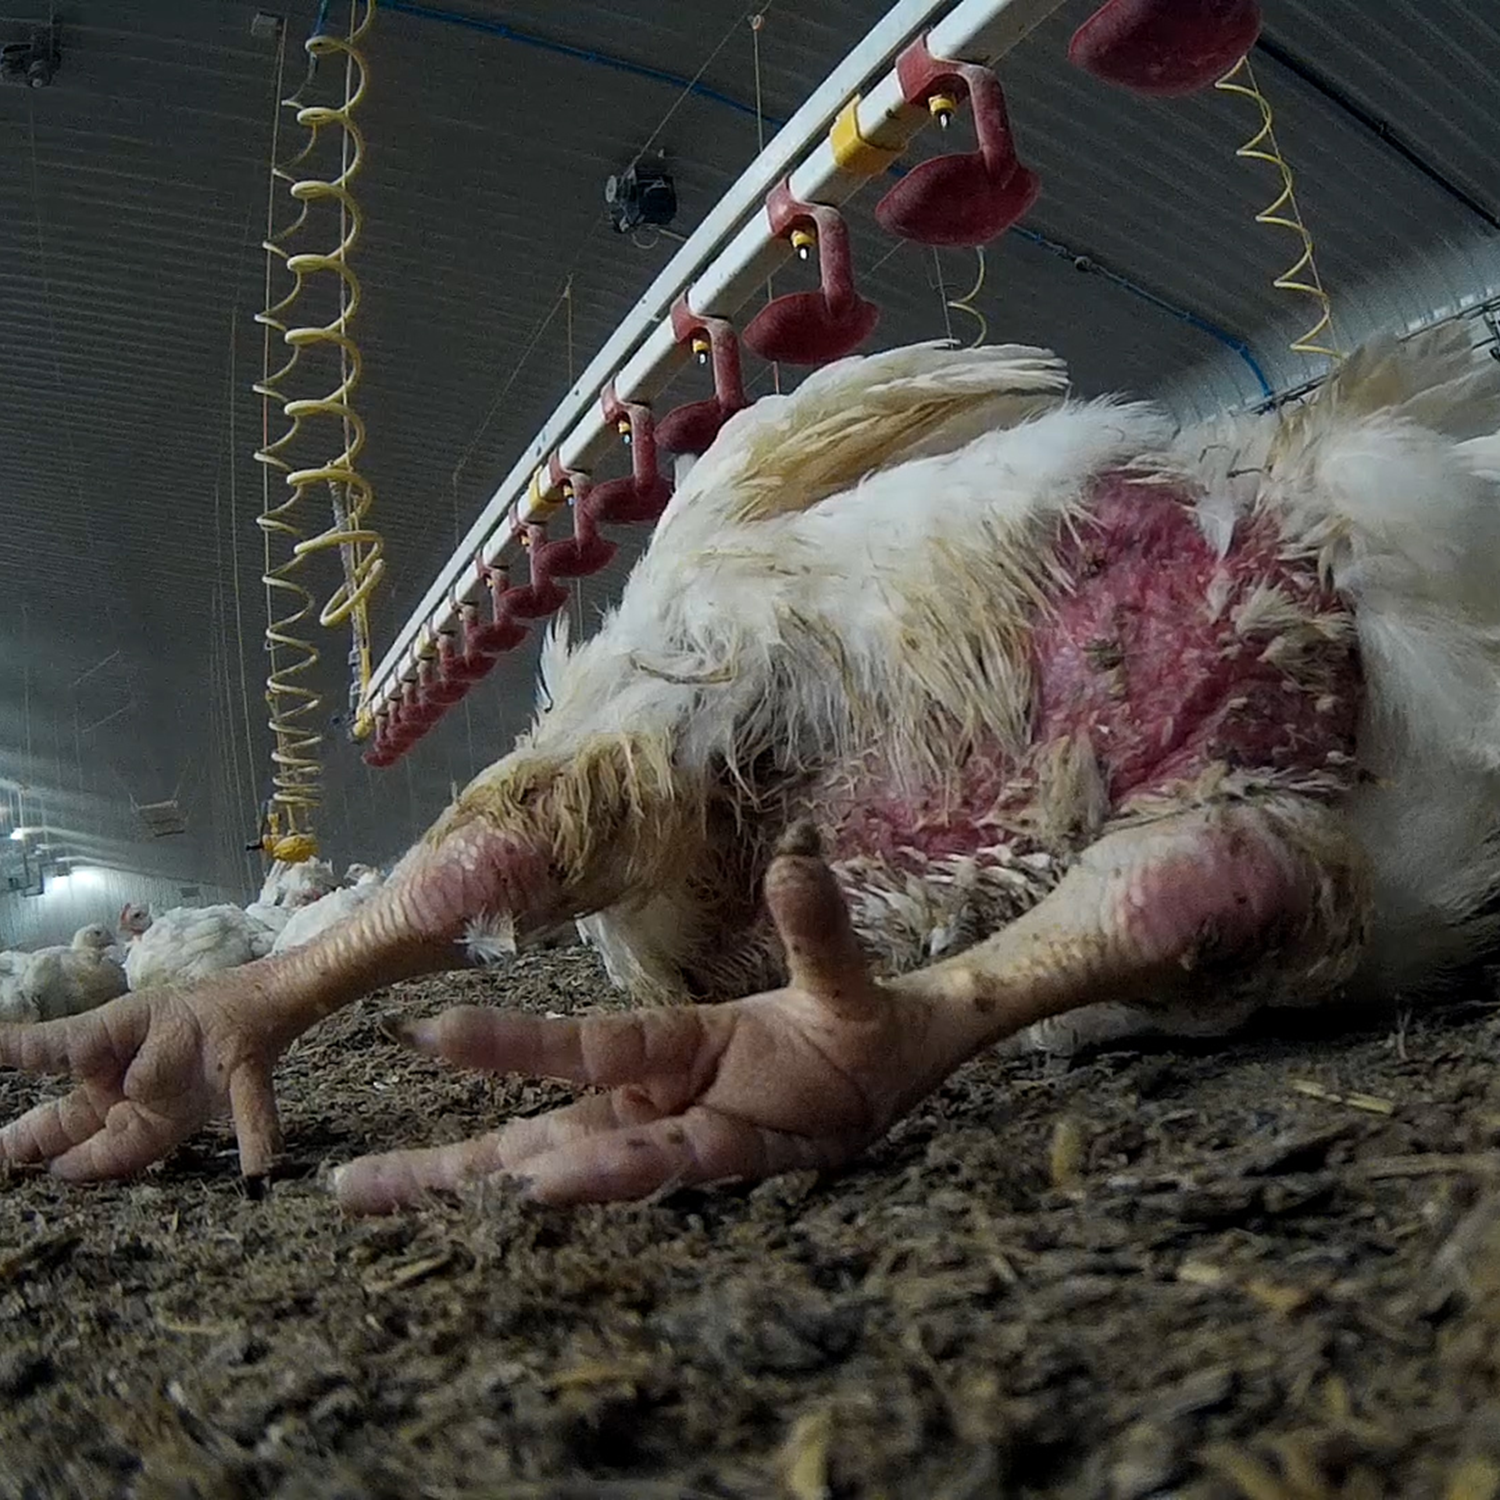 chicken with feather loss and burns in chicken factory farm